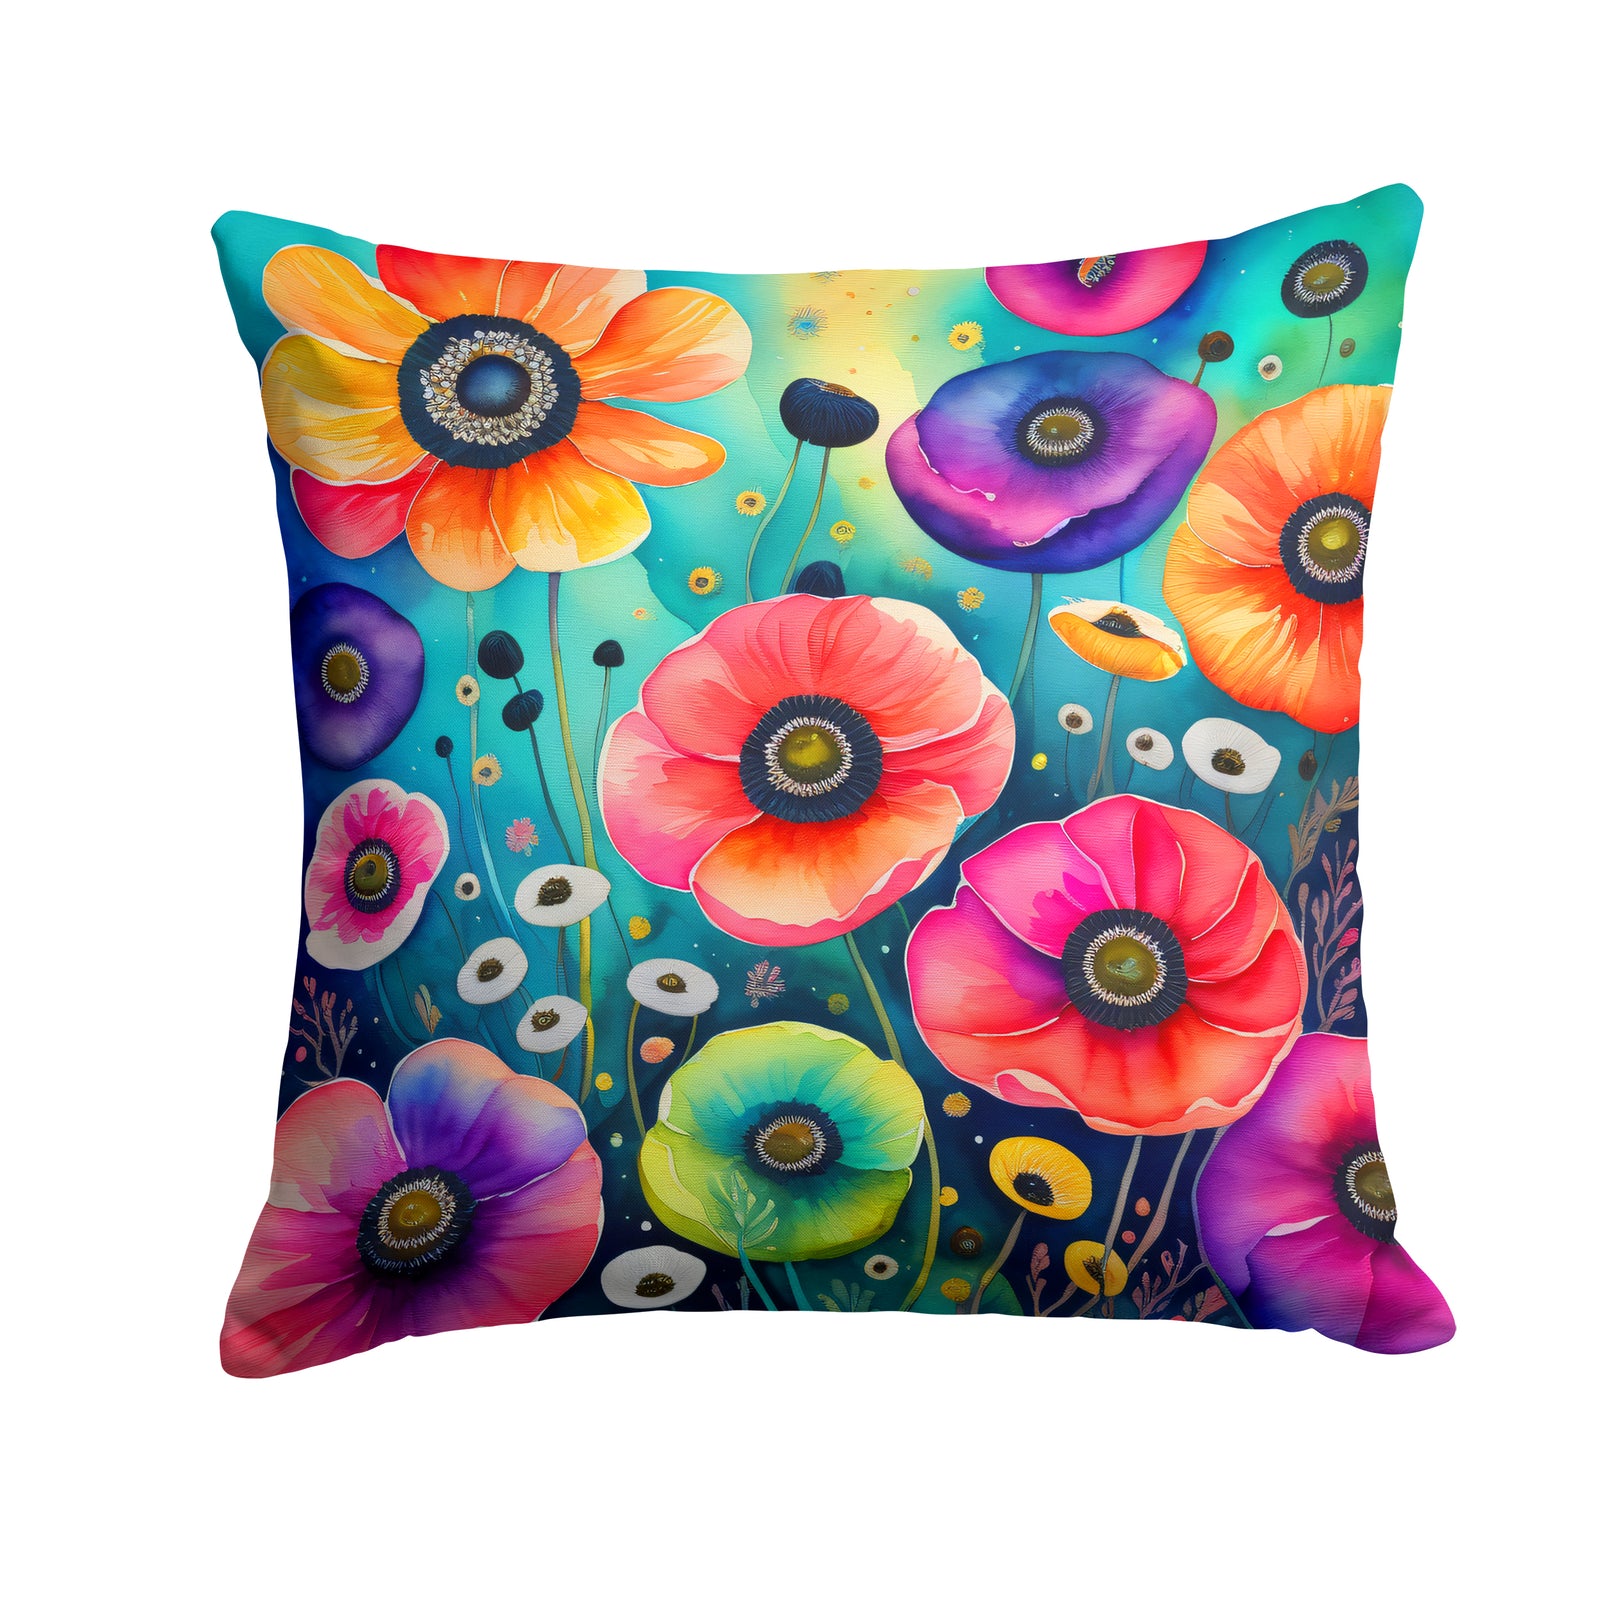 Buy this Colorful Anemones Fabric Decorative Pillow